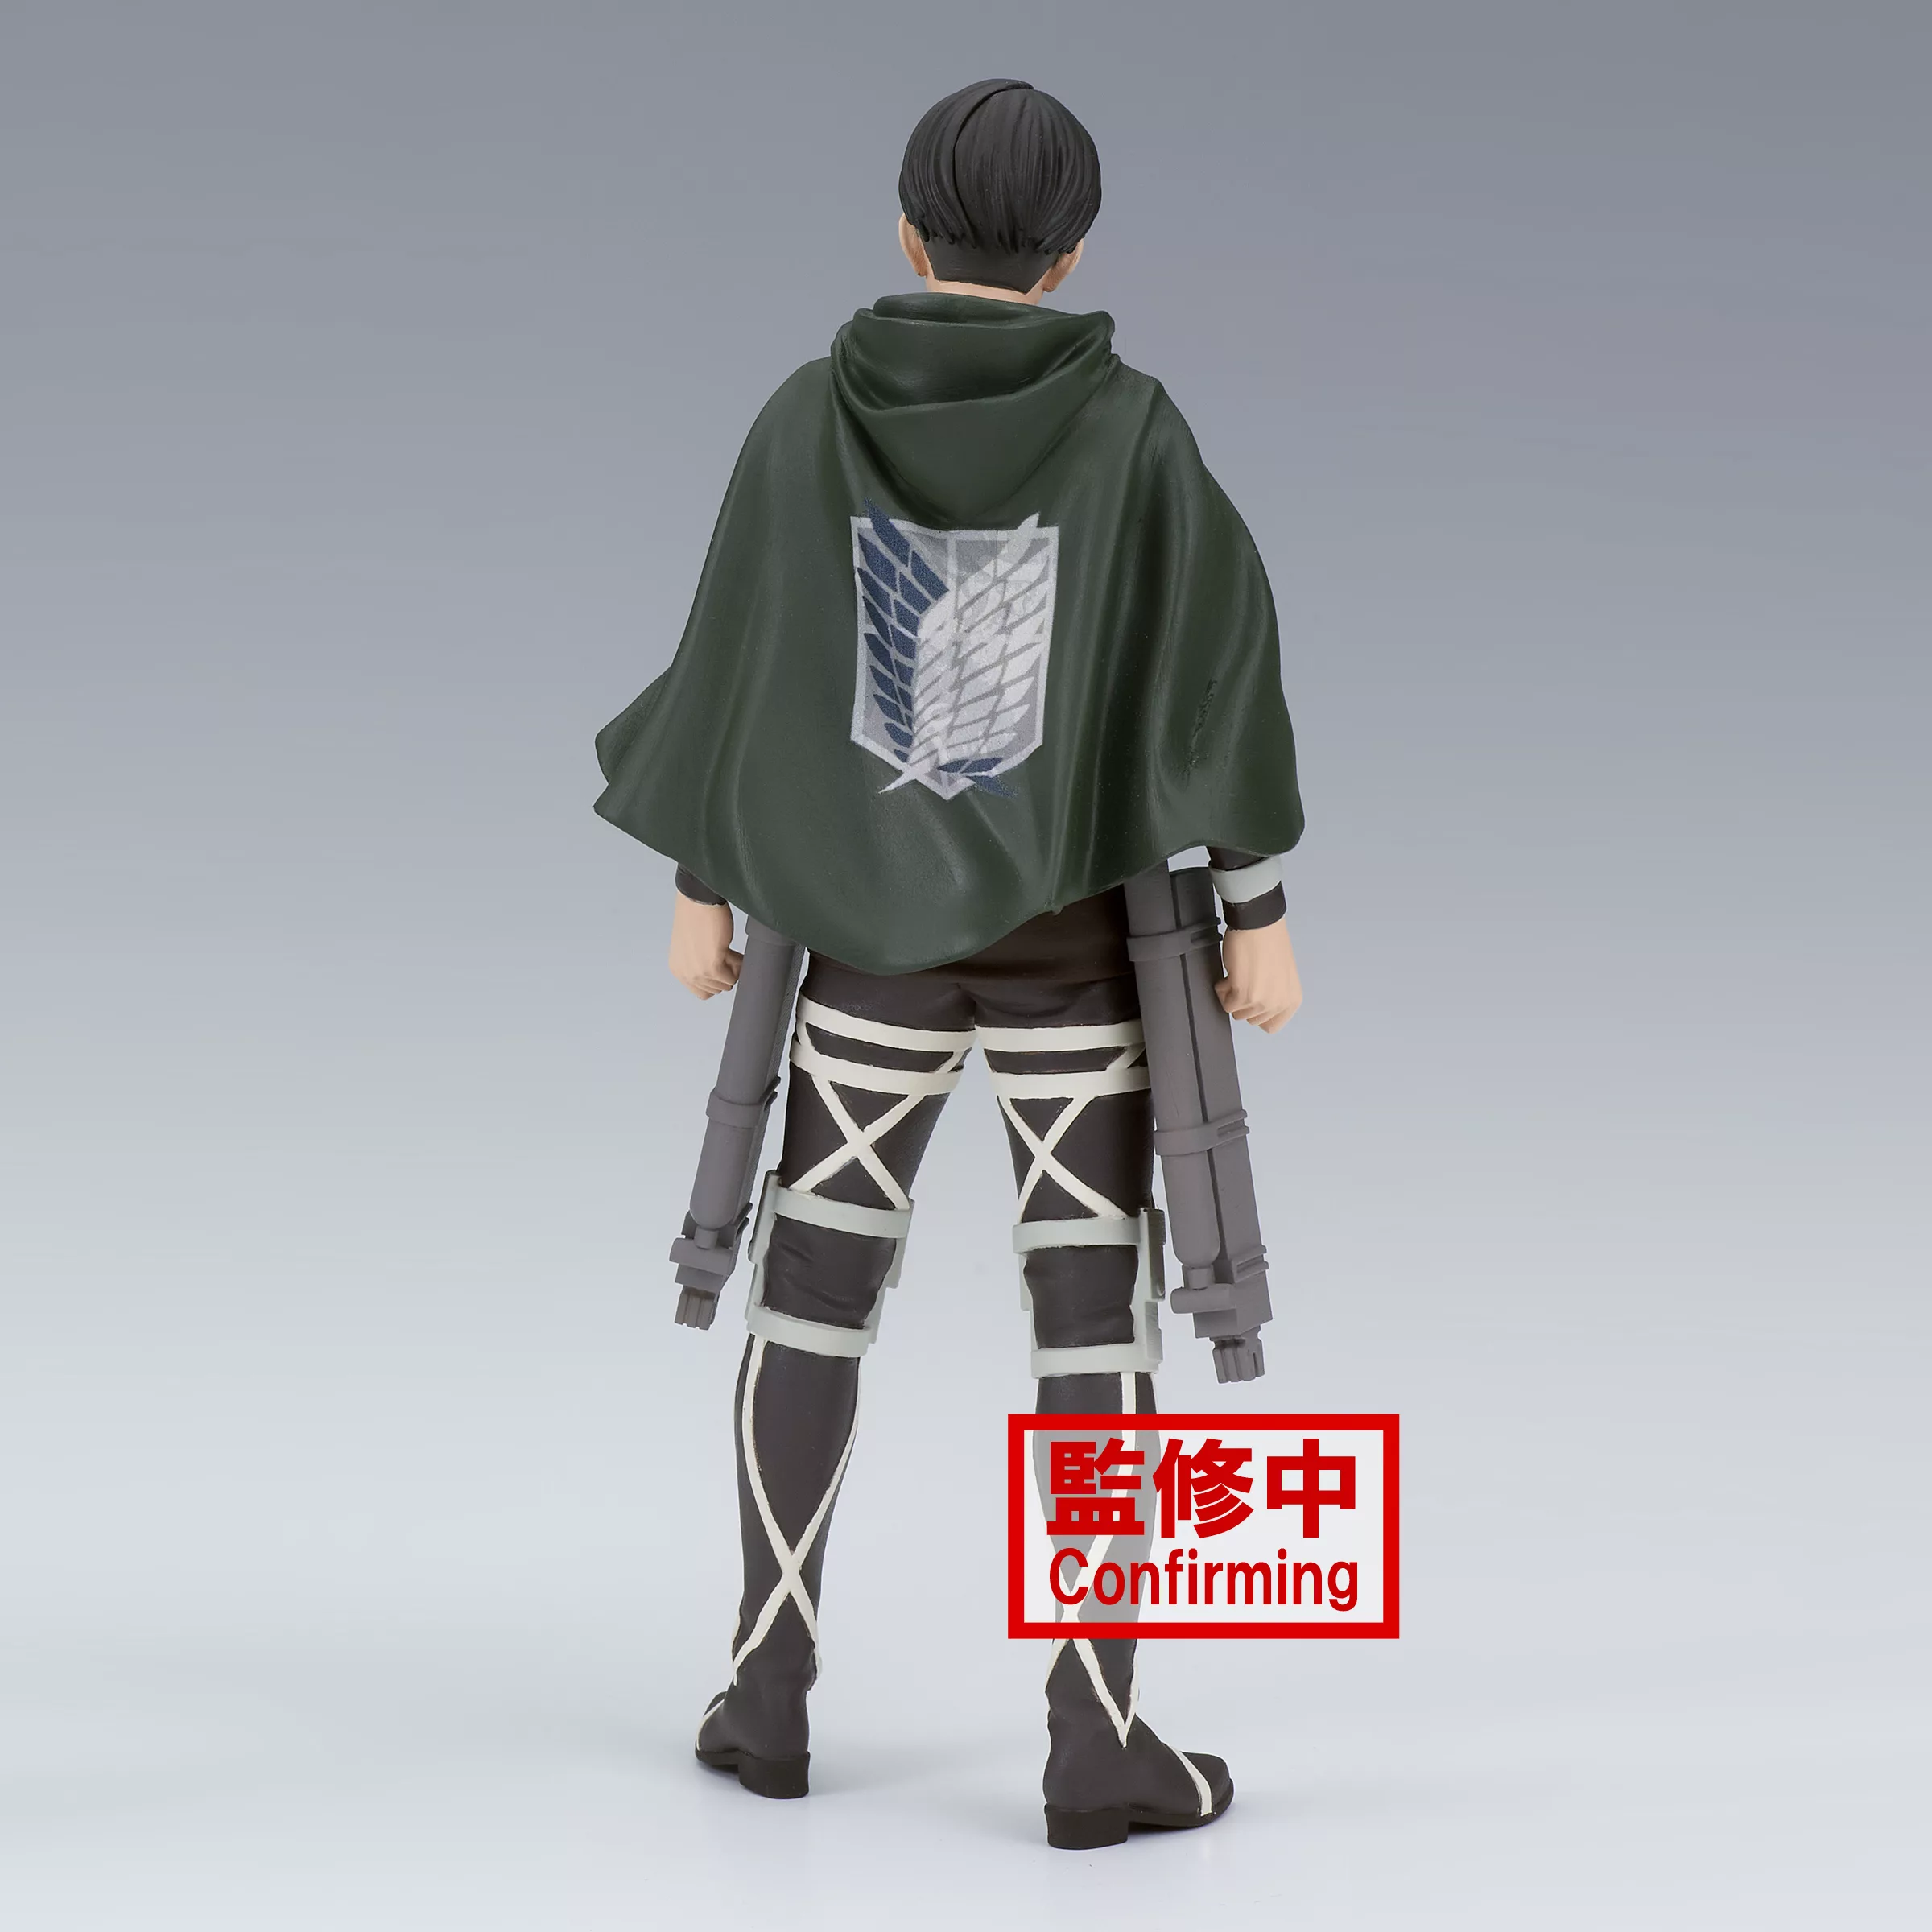 Attack On Titan 4 The Final Season Rivaille Cosplay Costume